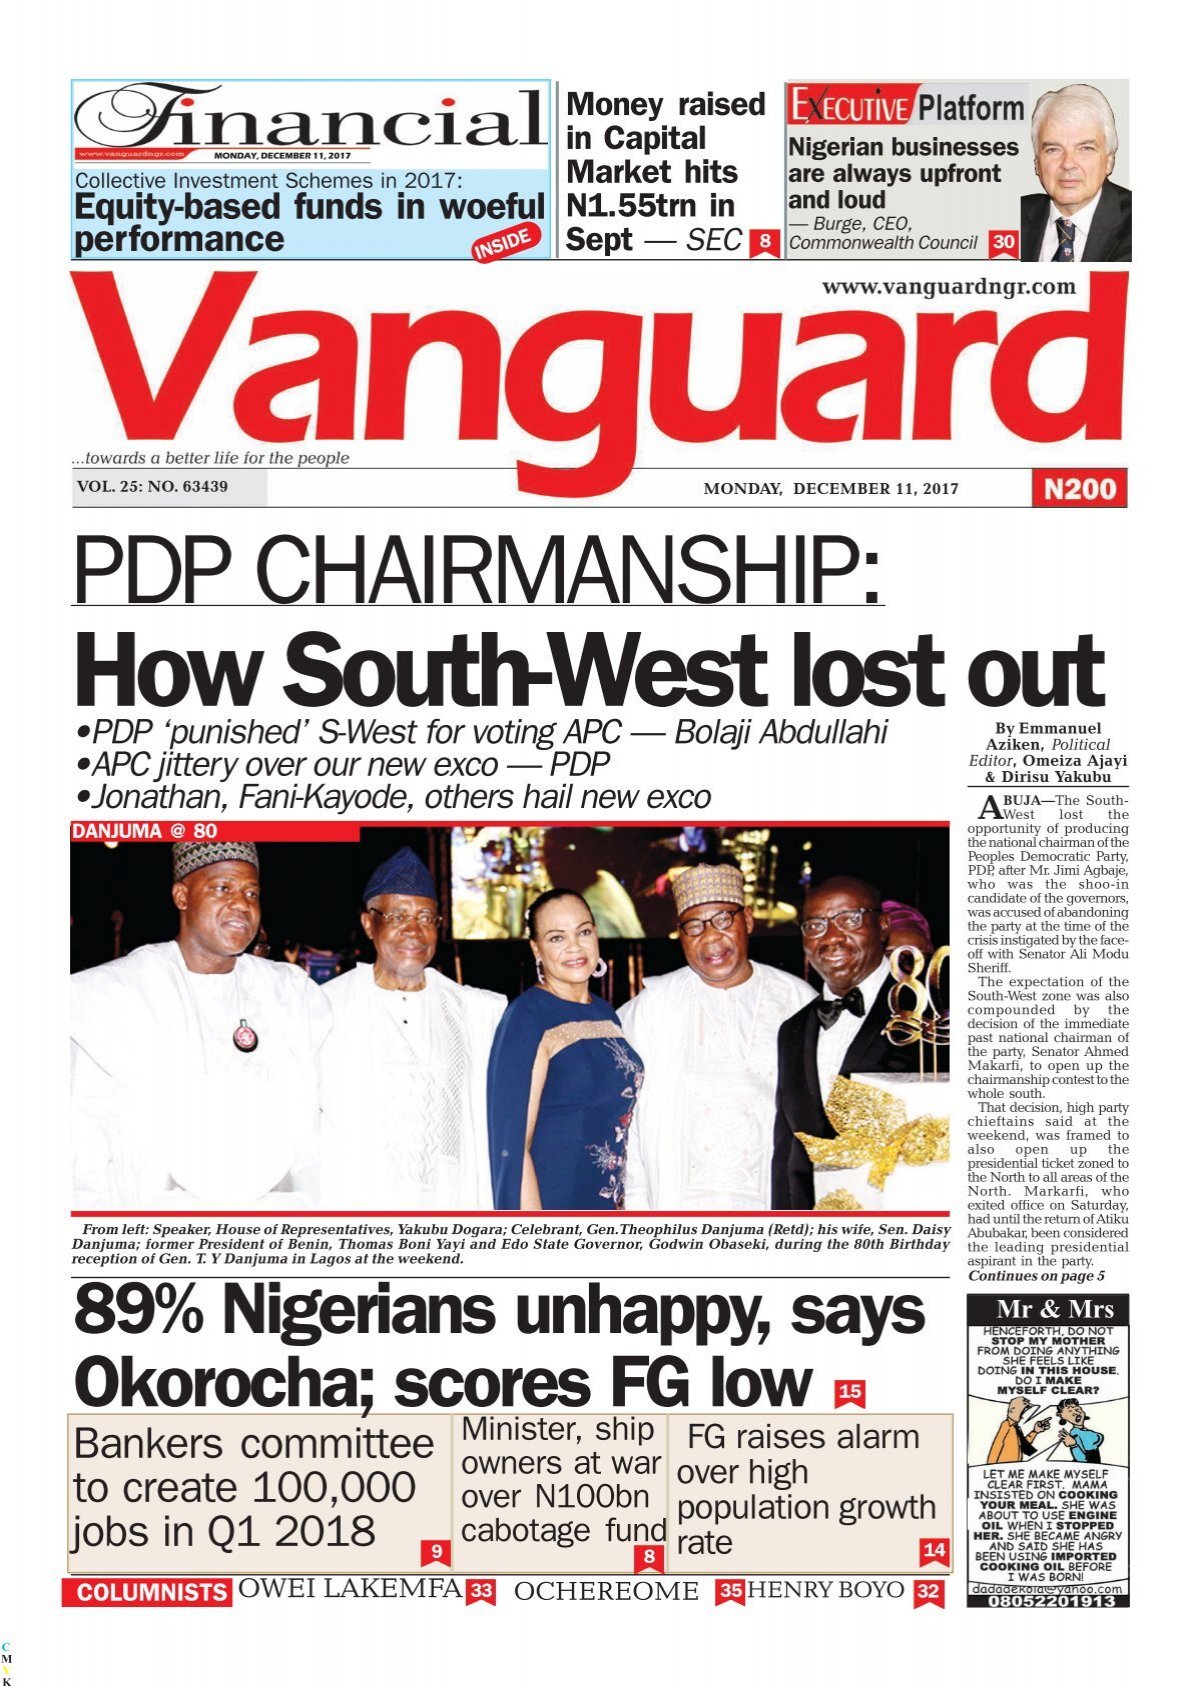 11122017 - PDP CHAIRMANSHIP: How South-West lost out